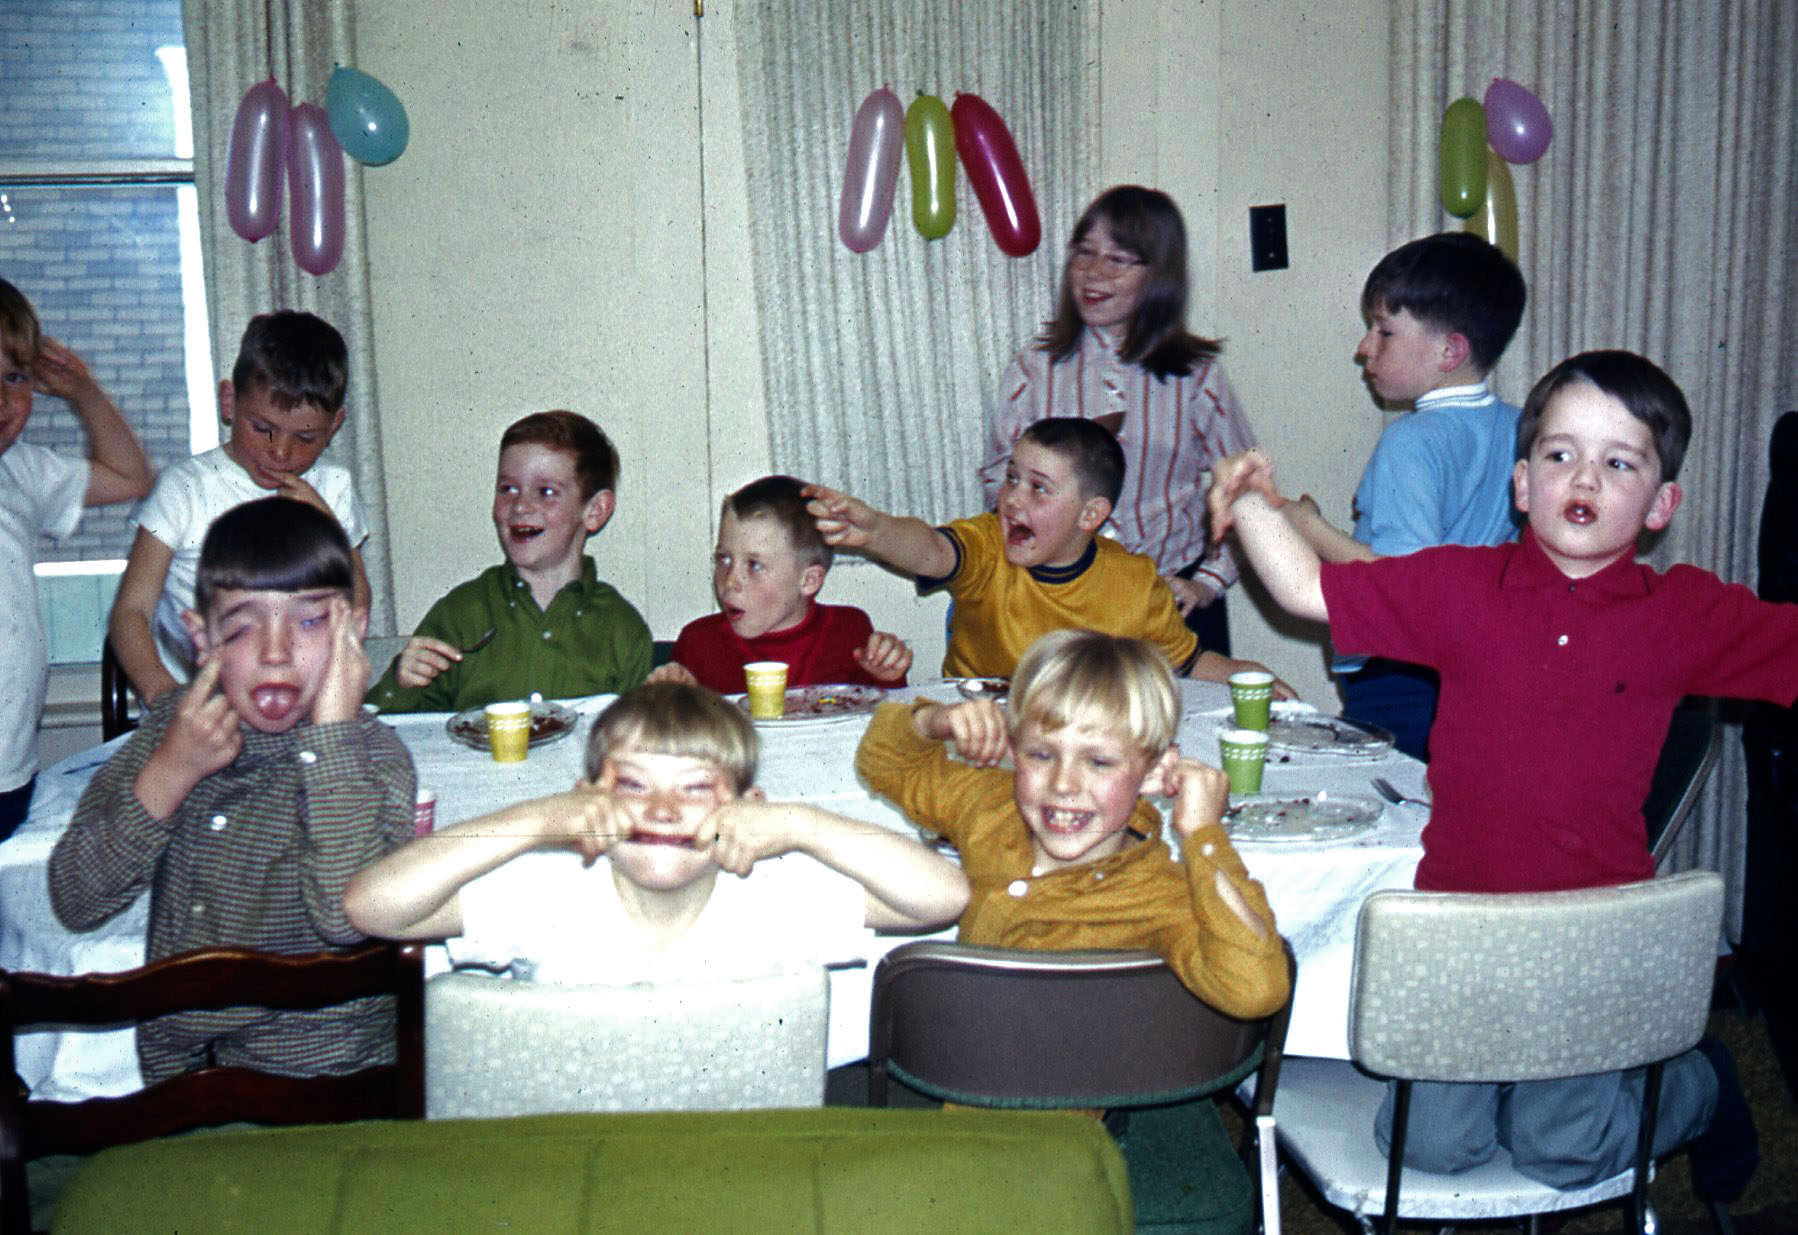 I see 1 Moe, 1 Curly, and 4 or 5 Larrys. 1969 birthday party in Rochester, Indiana. From a slide. Their faces really did stick like that if you think about it. We're looking at them now. View full size.